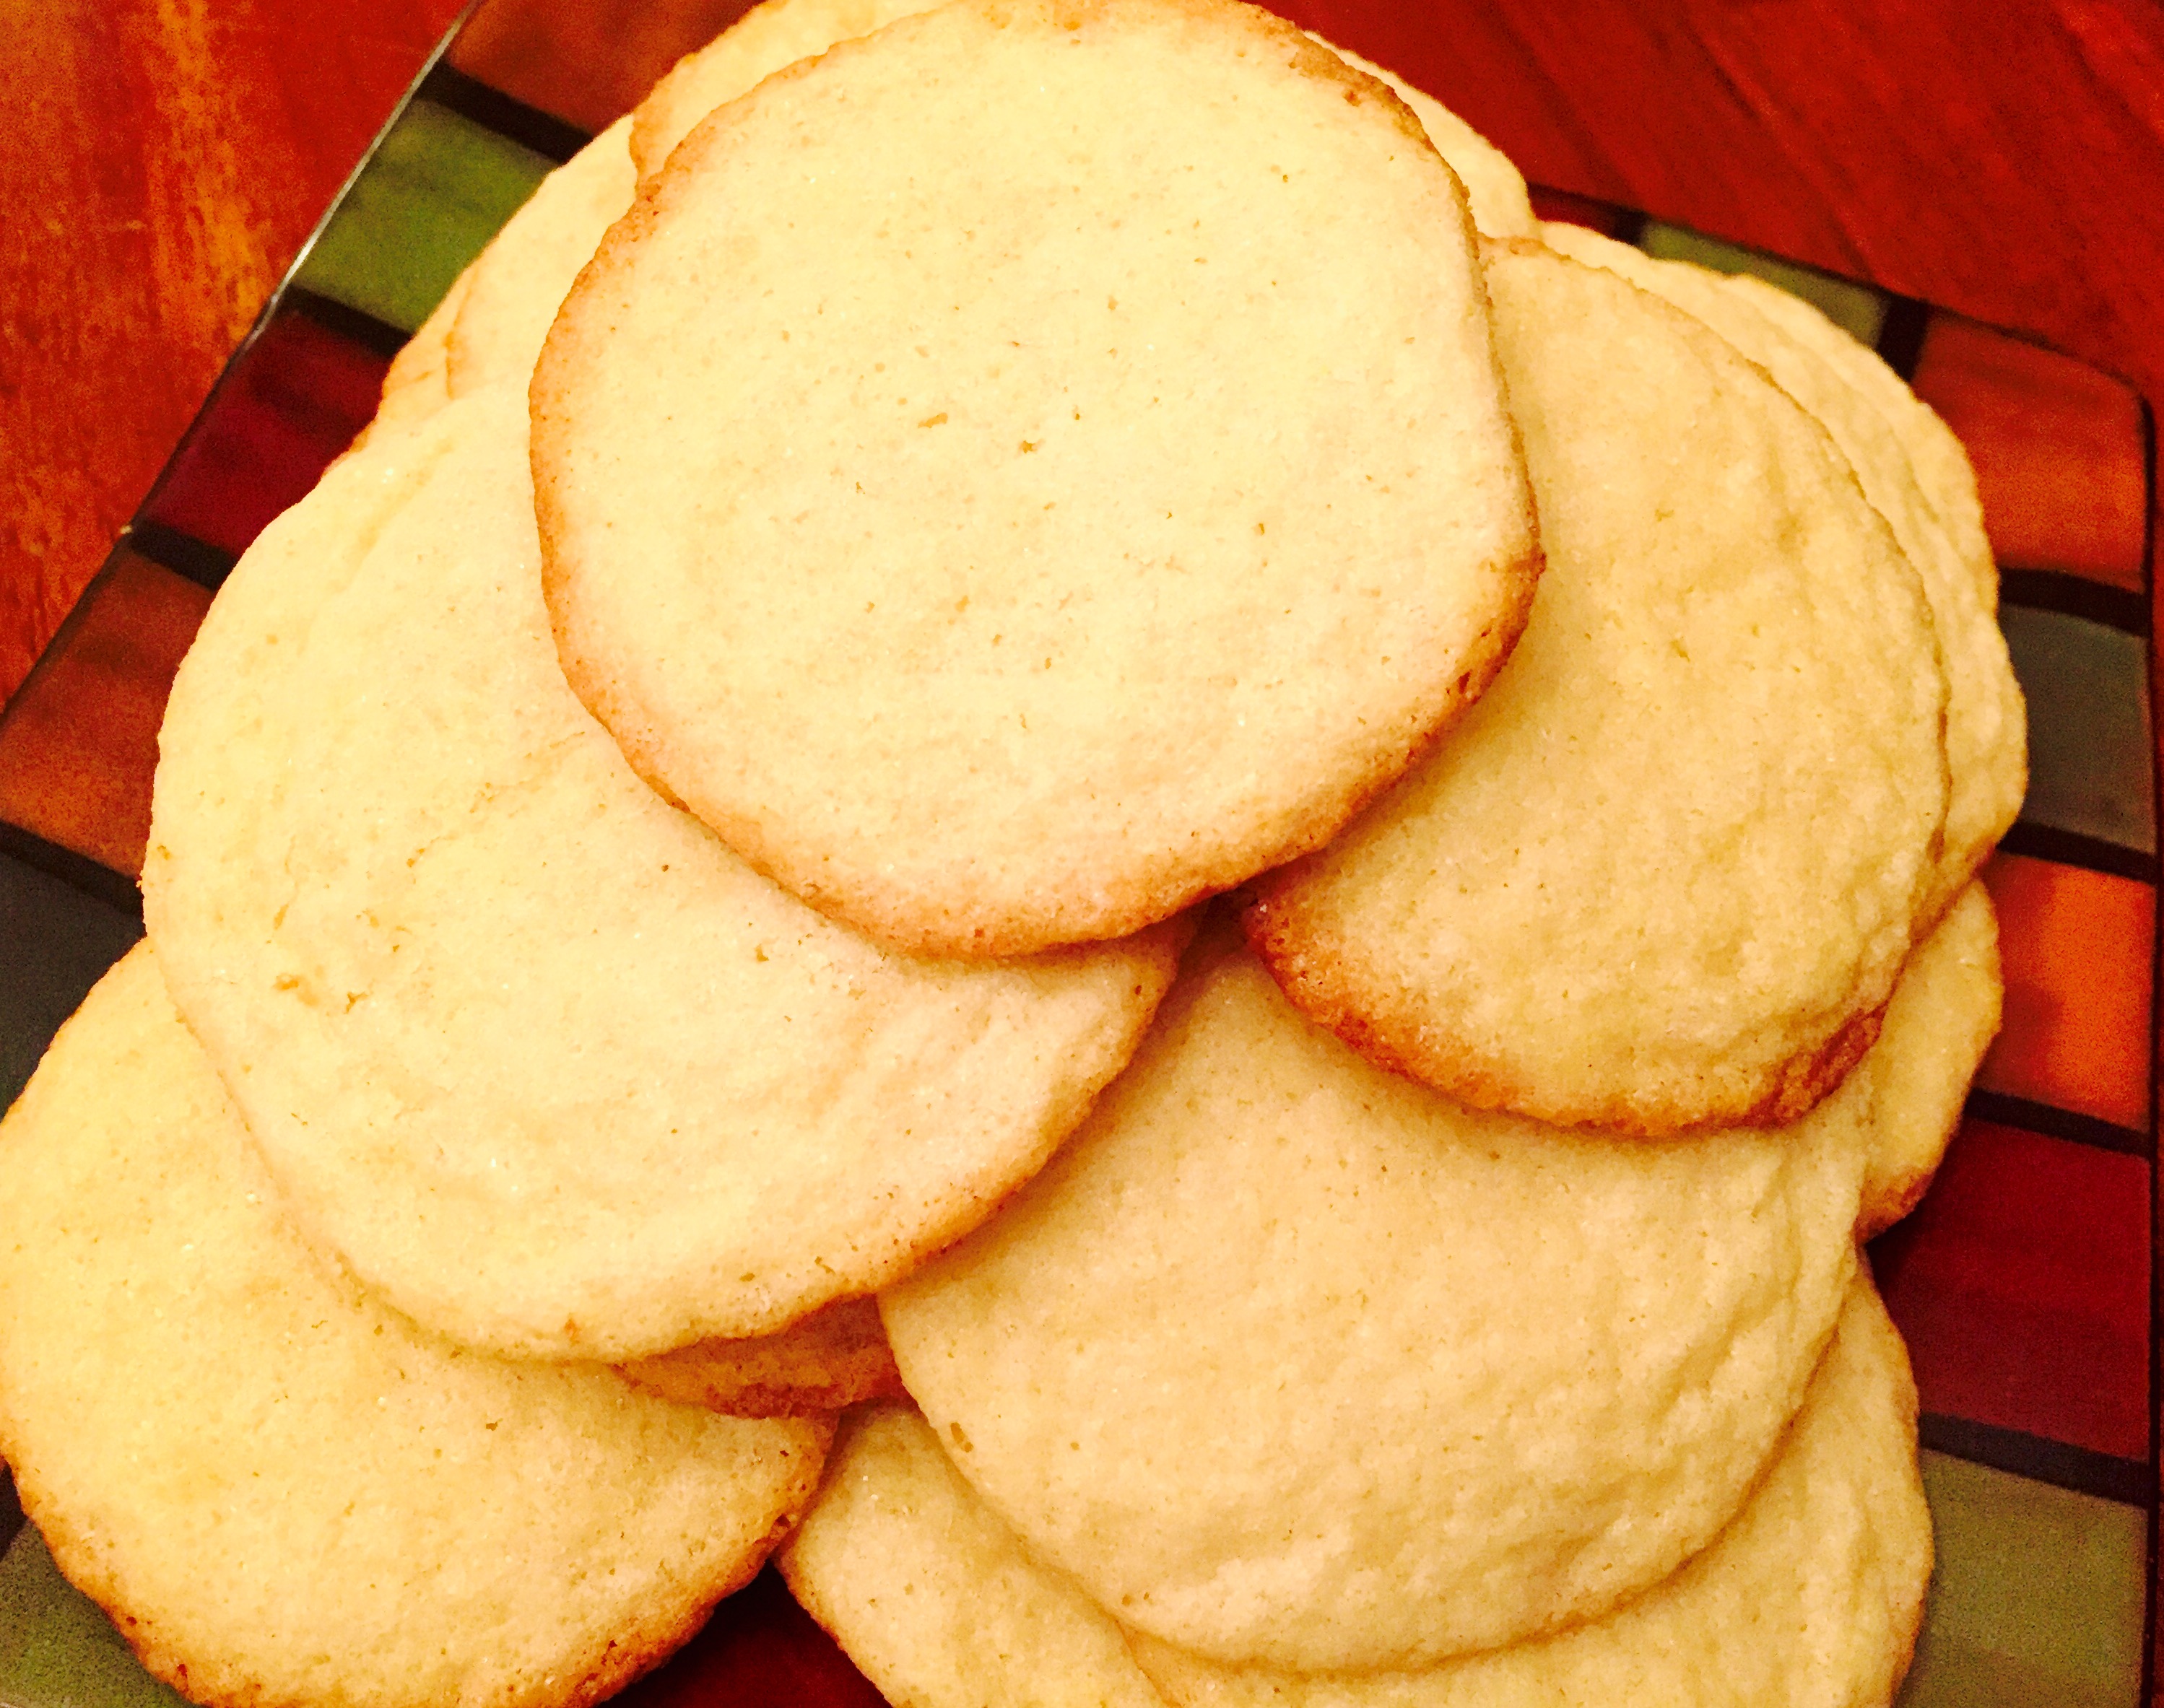 The moist, chewy and delicious results of my traditionally inspired gluten free sugar cookie recipe